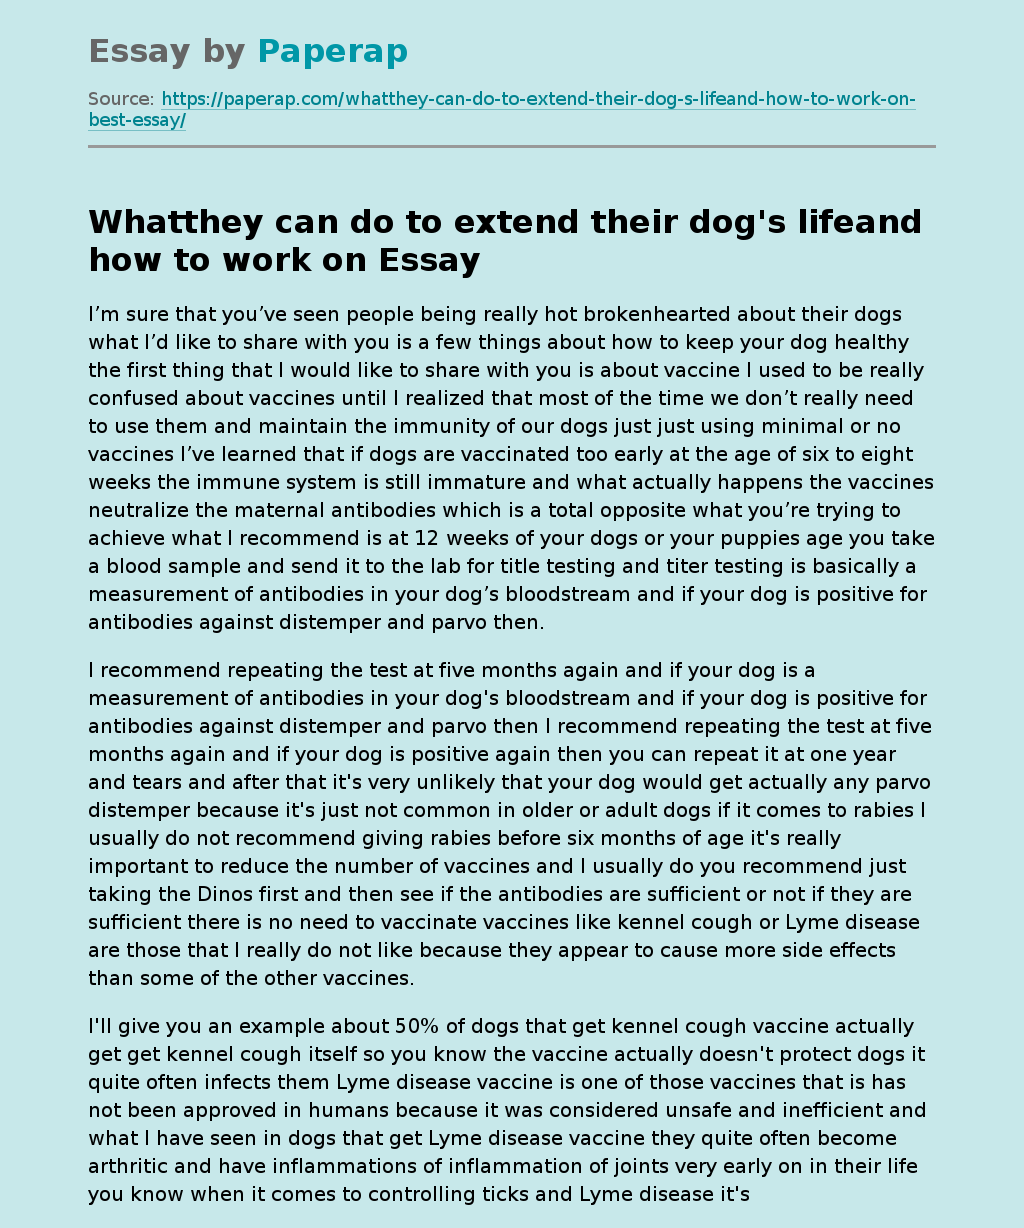 Whatthey can do to extend their dog's lifeand how to work on